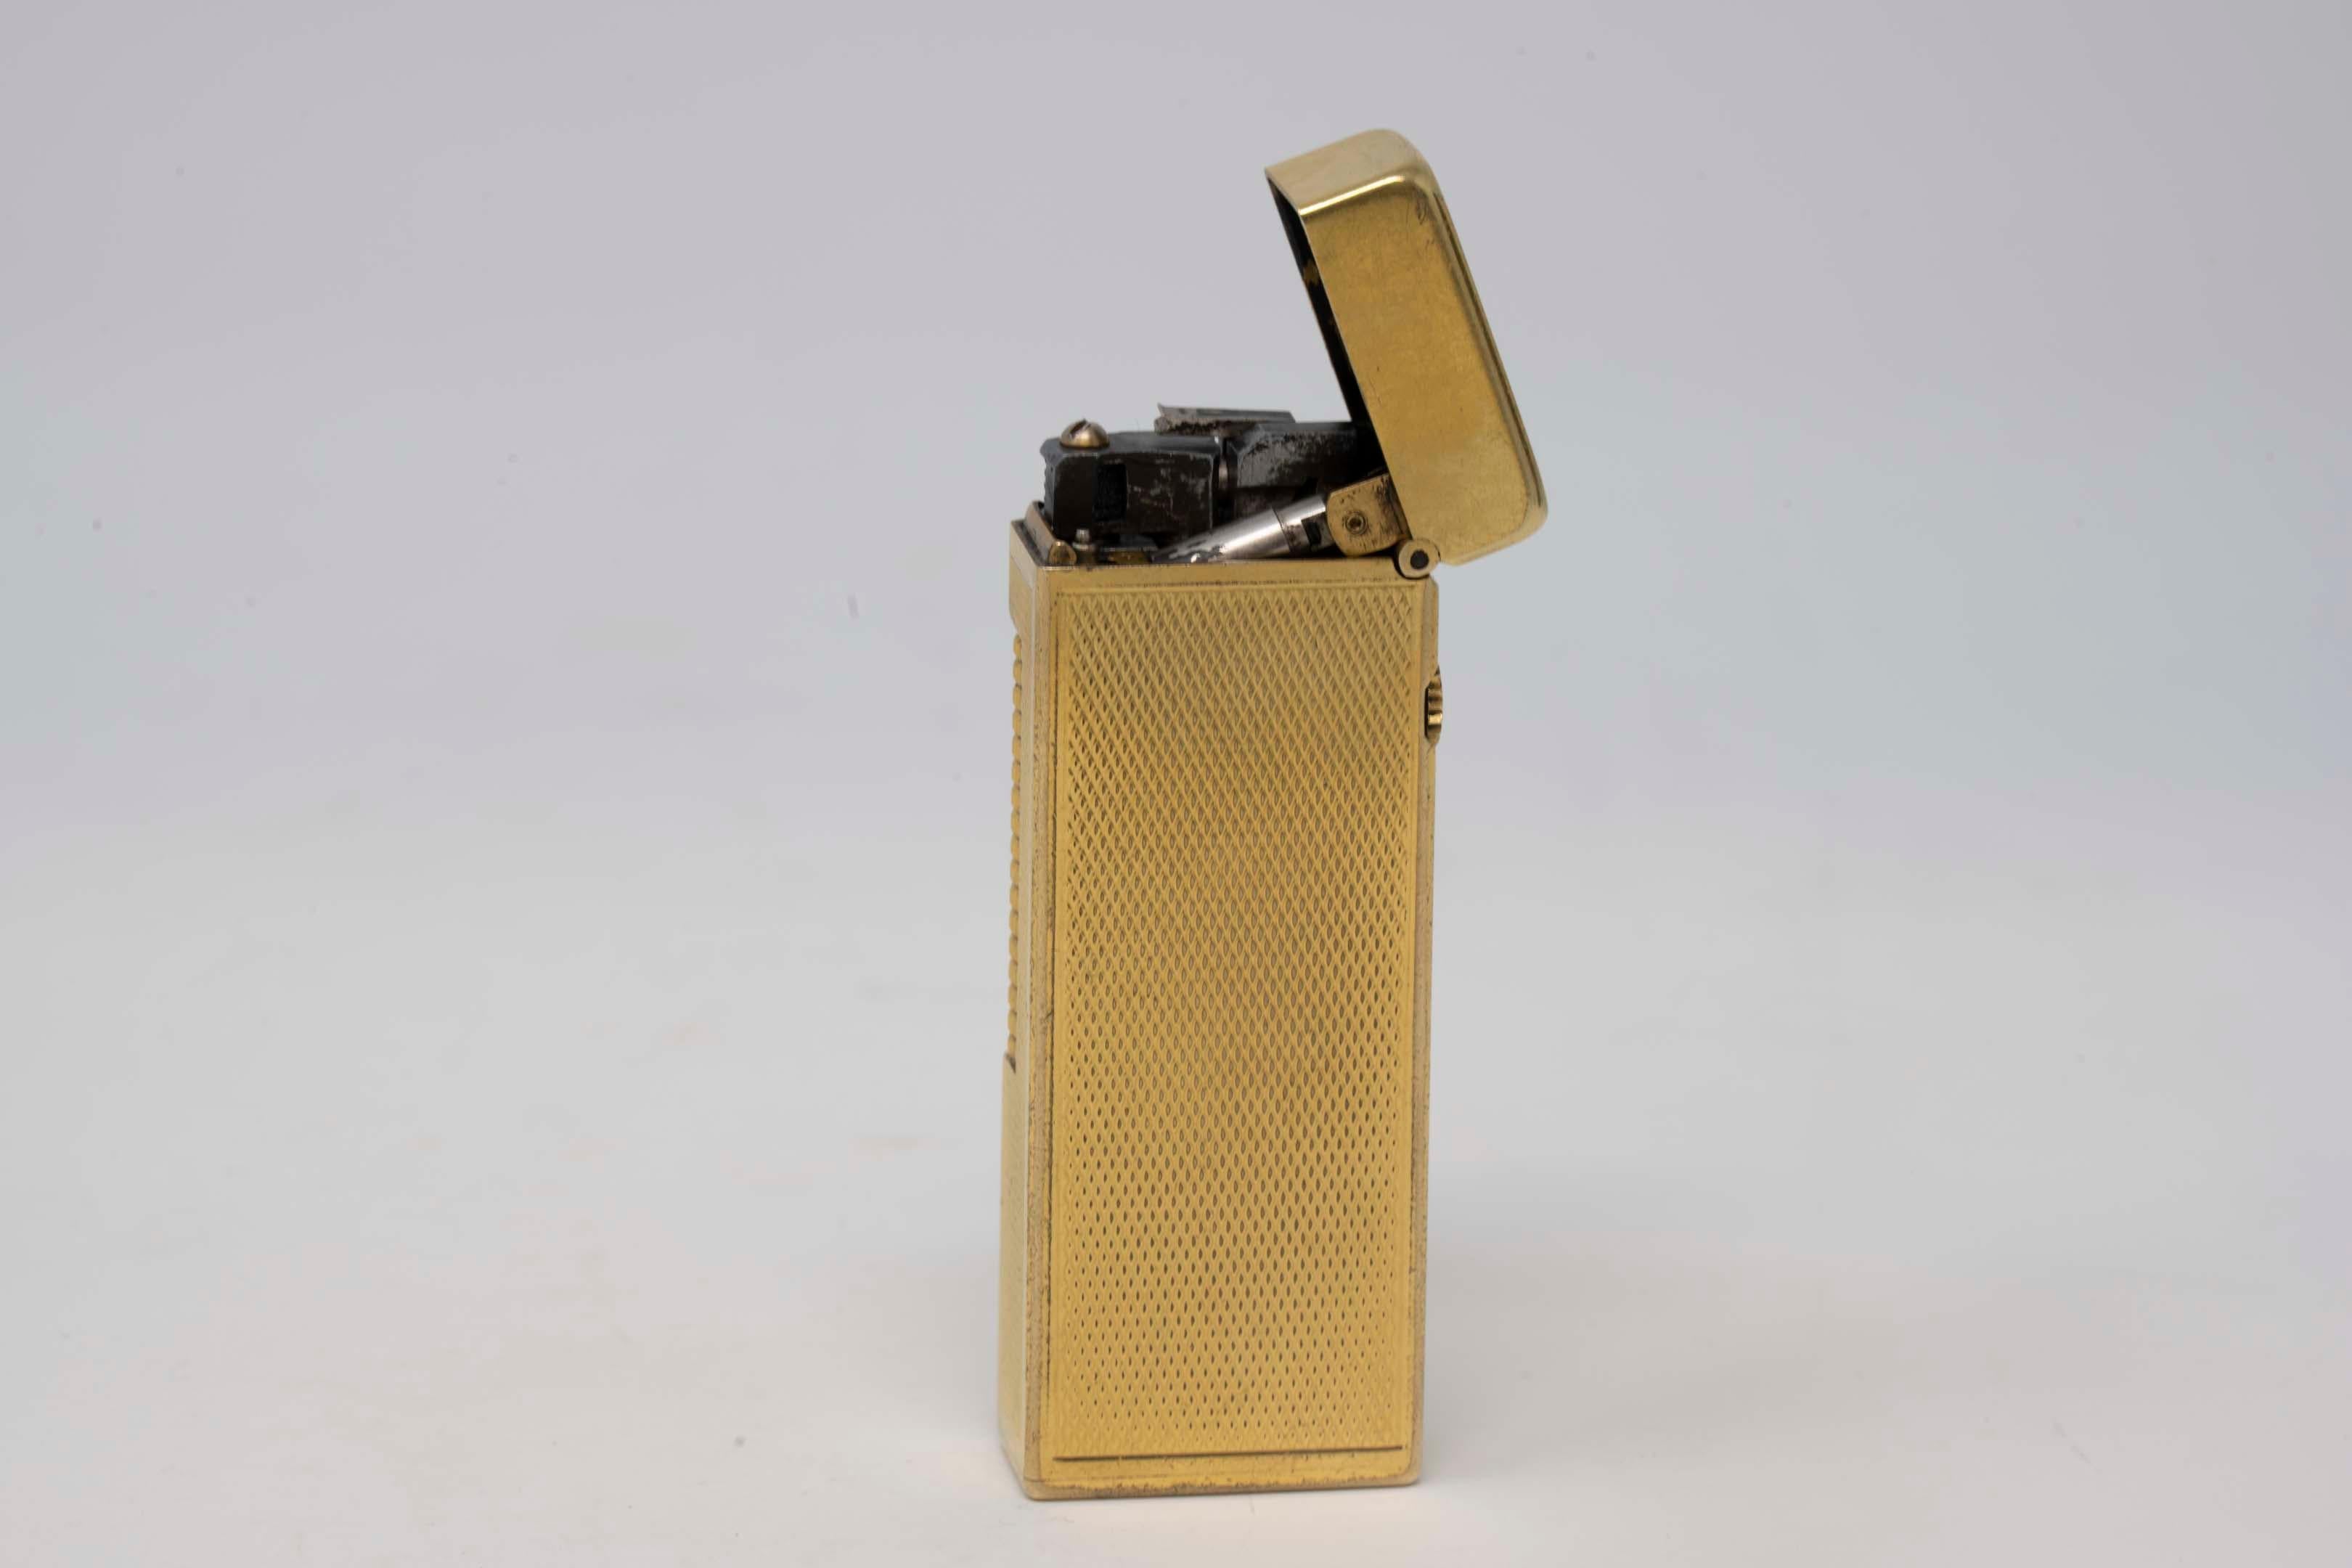 Dunhill Rollagas lighter gold plated barley finish with plain top. Made in Switzerland, marked at the base. Second half of the 20th century, good preowned condition, needs flint and gas.
